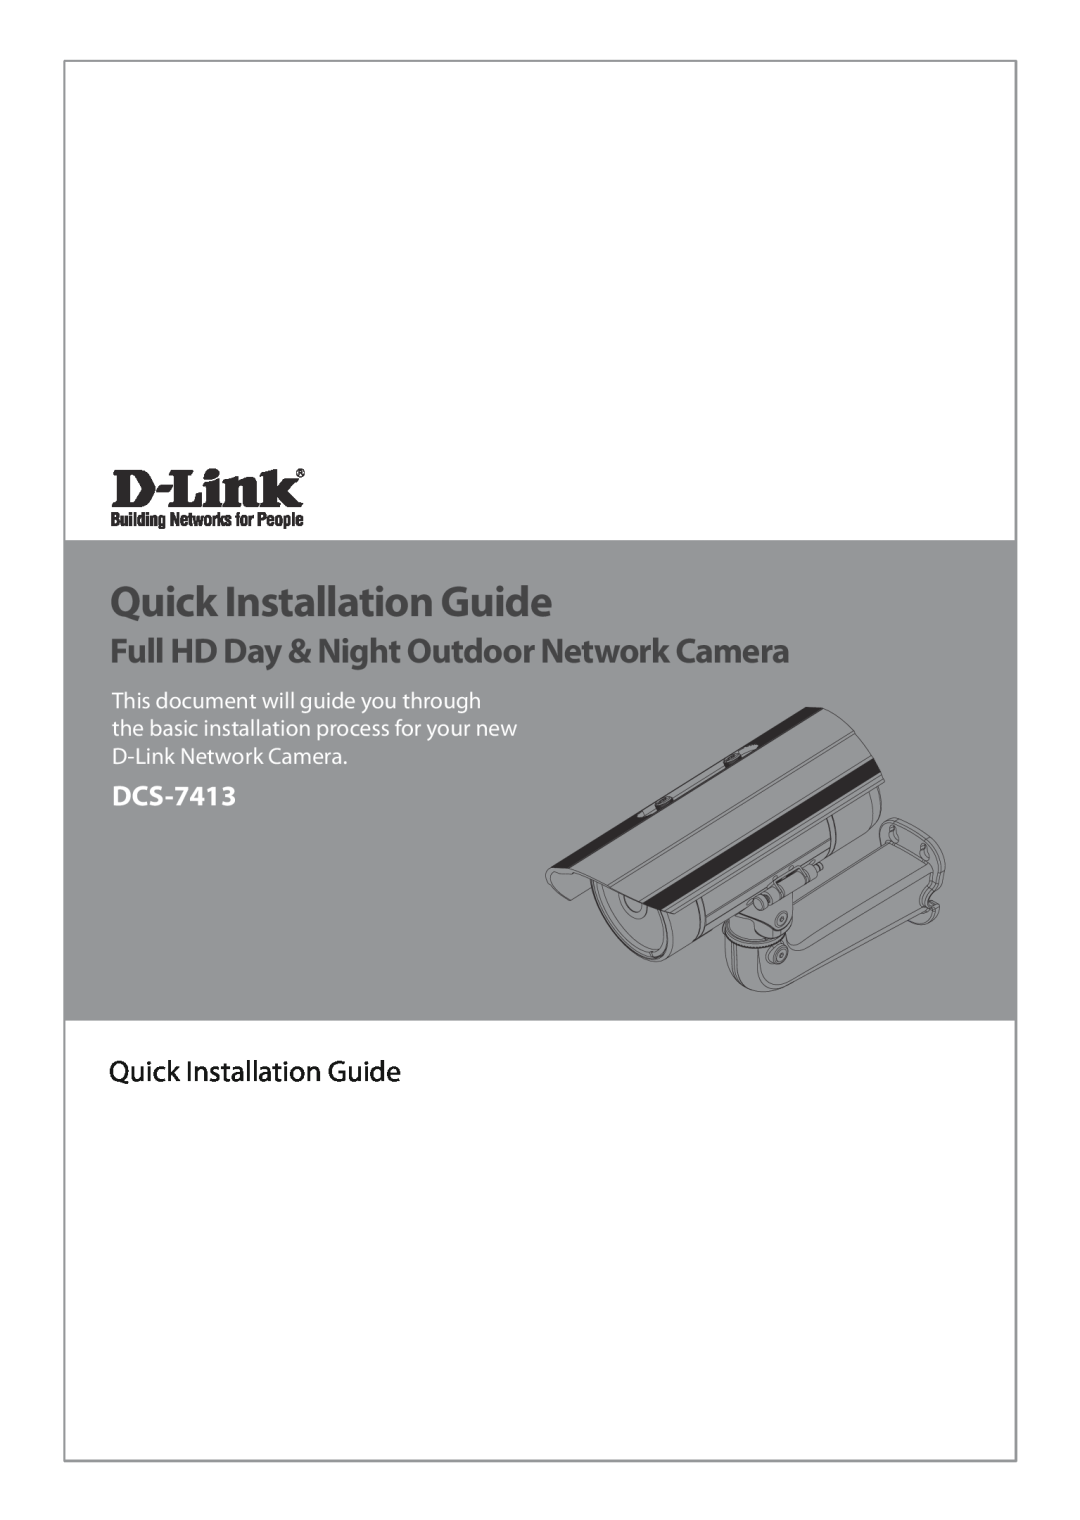 D-Link DCS-7413 manual Quick Installation Guide, Full HD Day & Night Outdoor Network Camera 